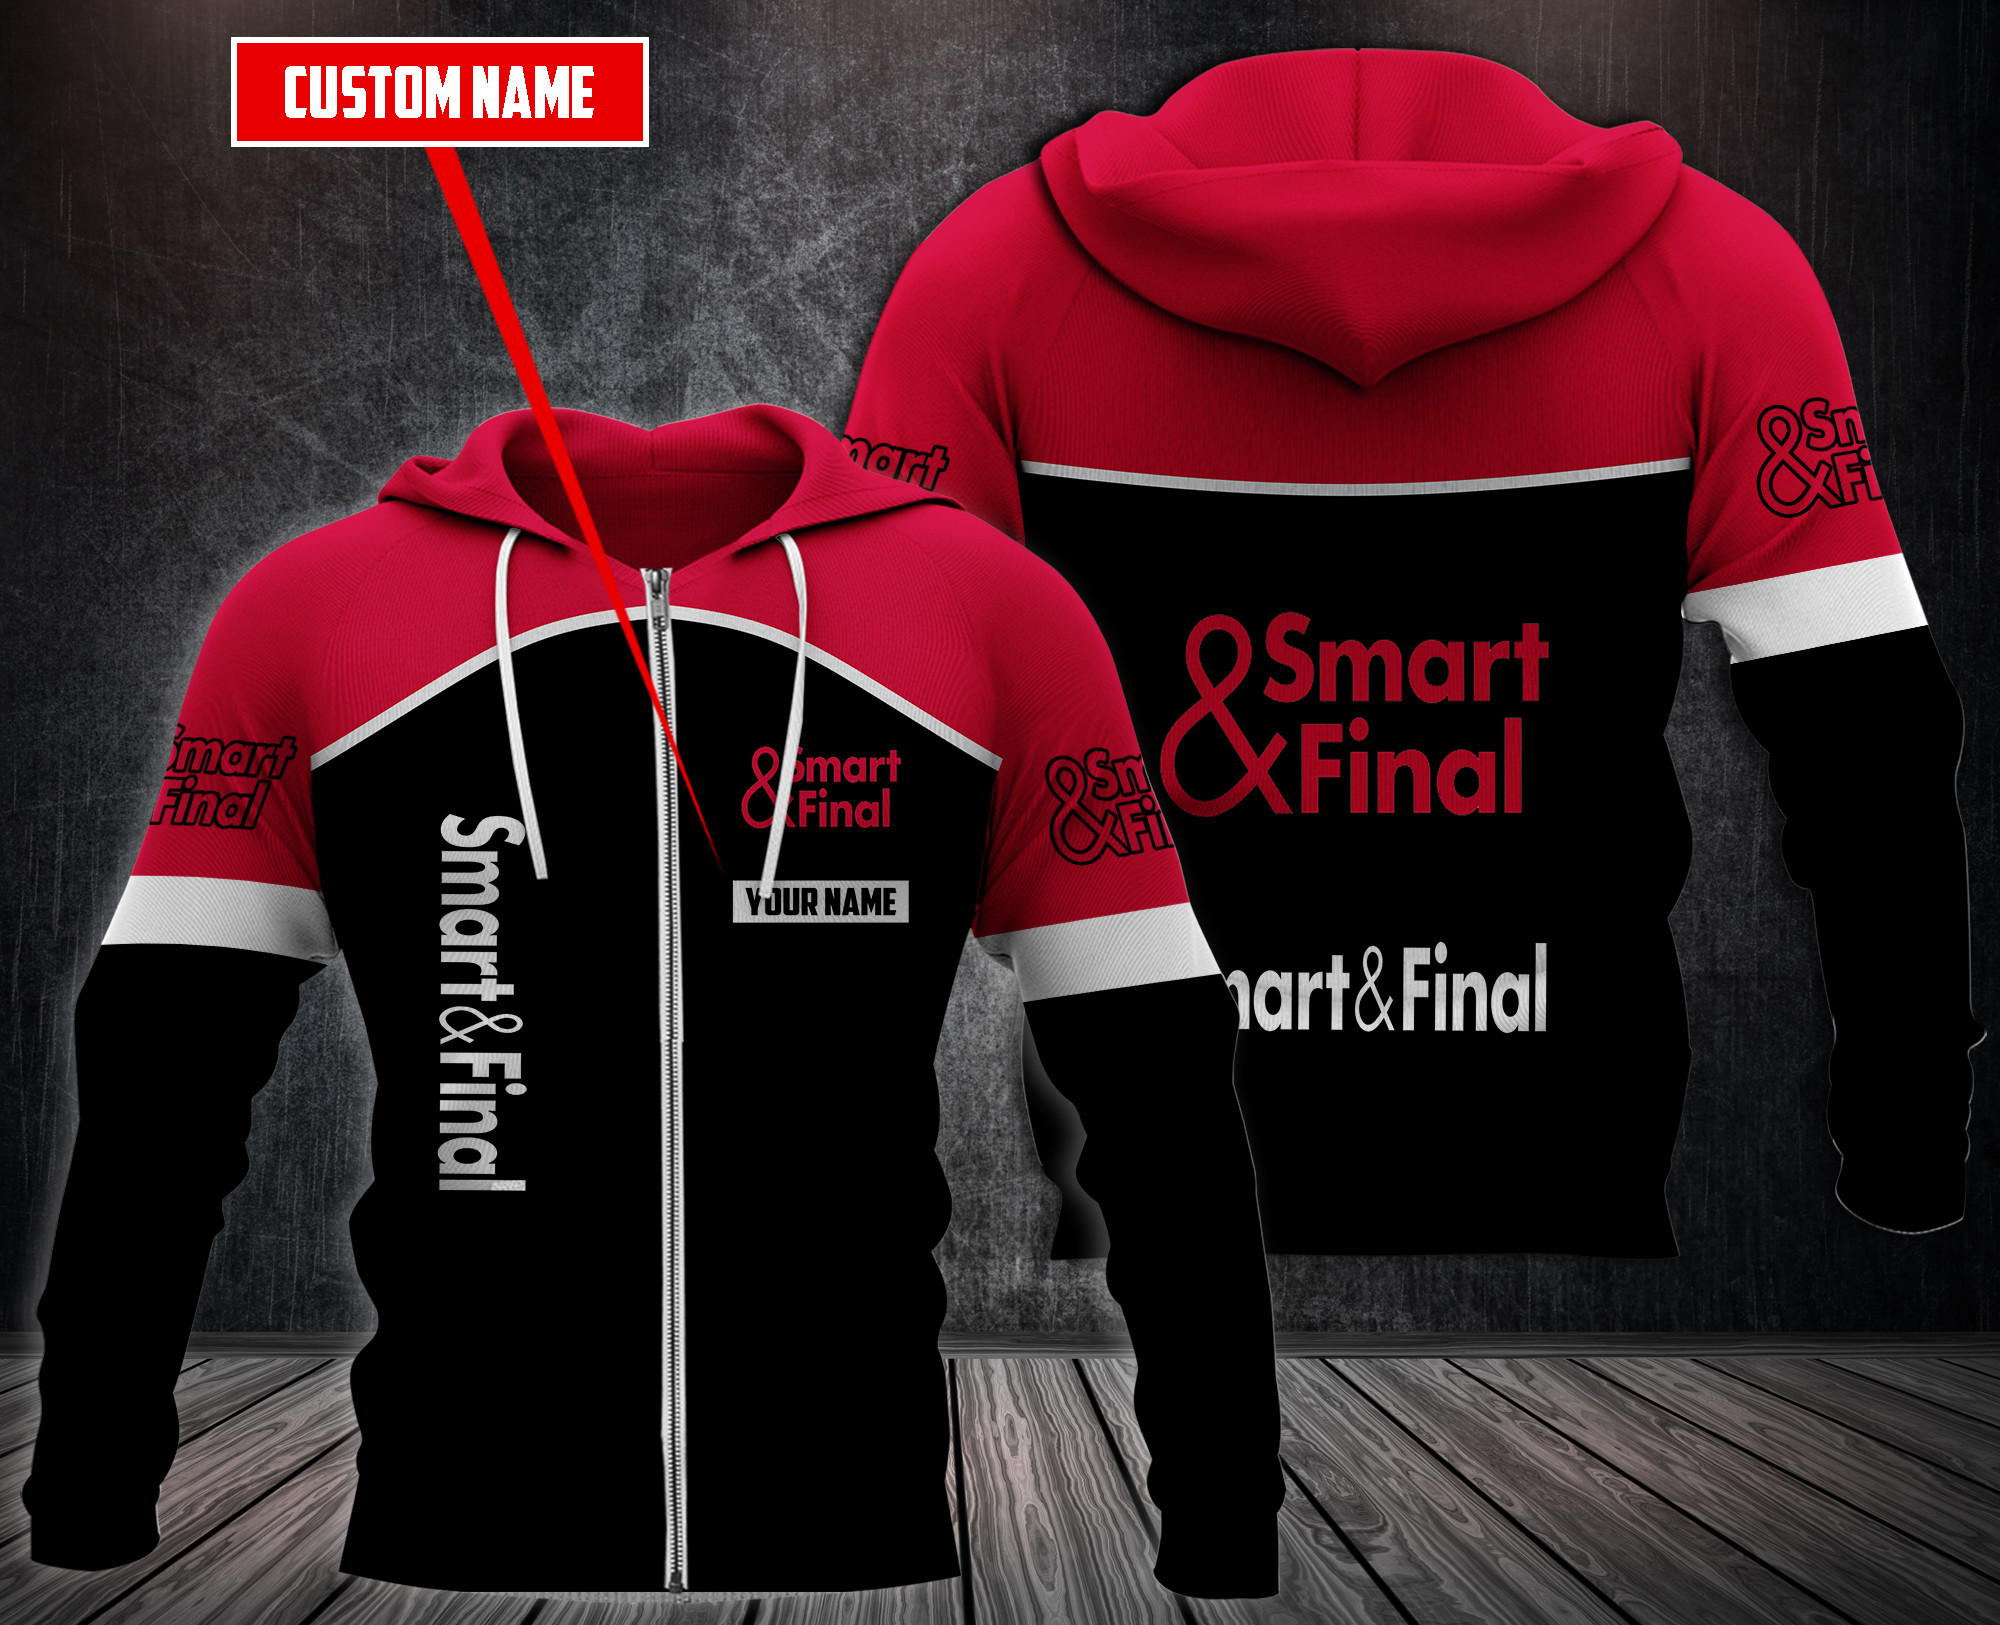 Choose the right hoodies for you on our boxboxshirt and ethershirt websites in 2022 46